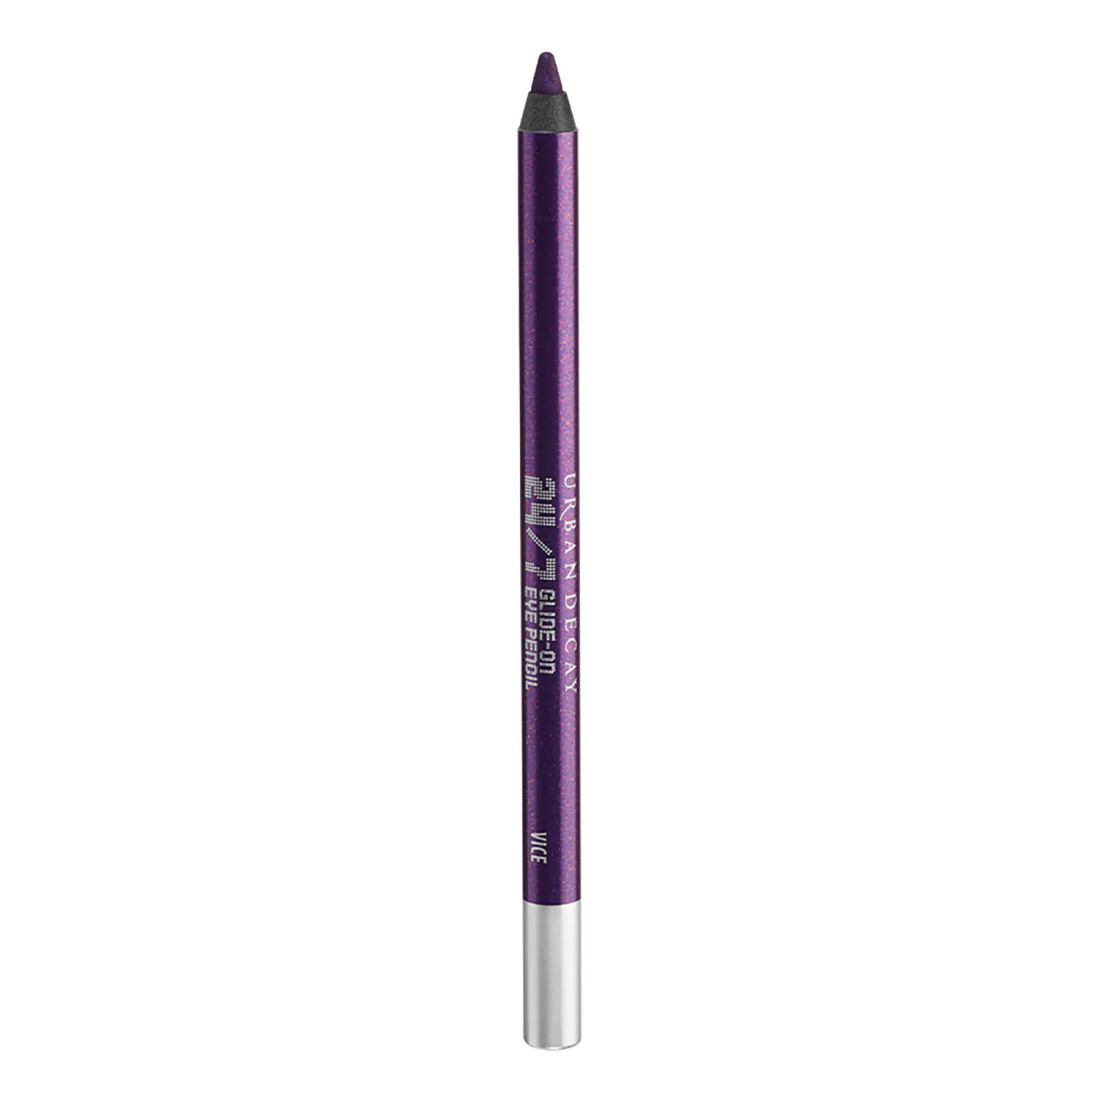 Crayon Yeux Waterproof '24/7 Glide On' - Vice 1.2 g